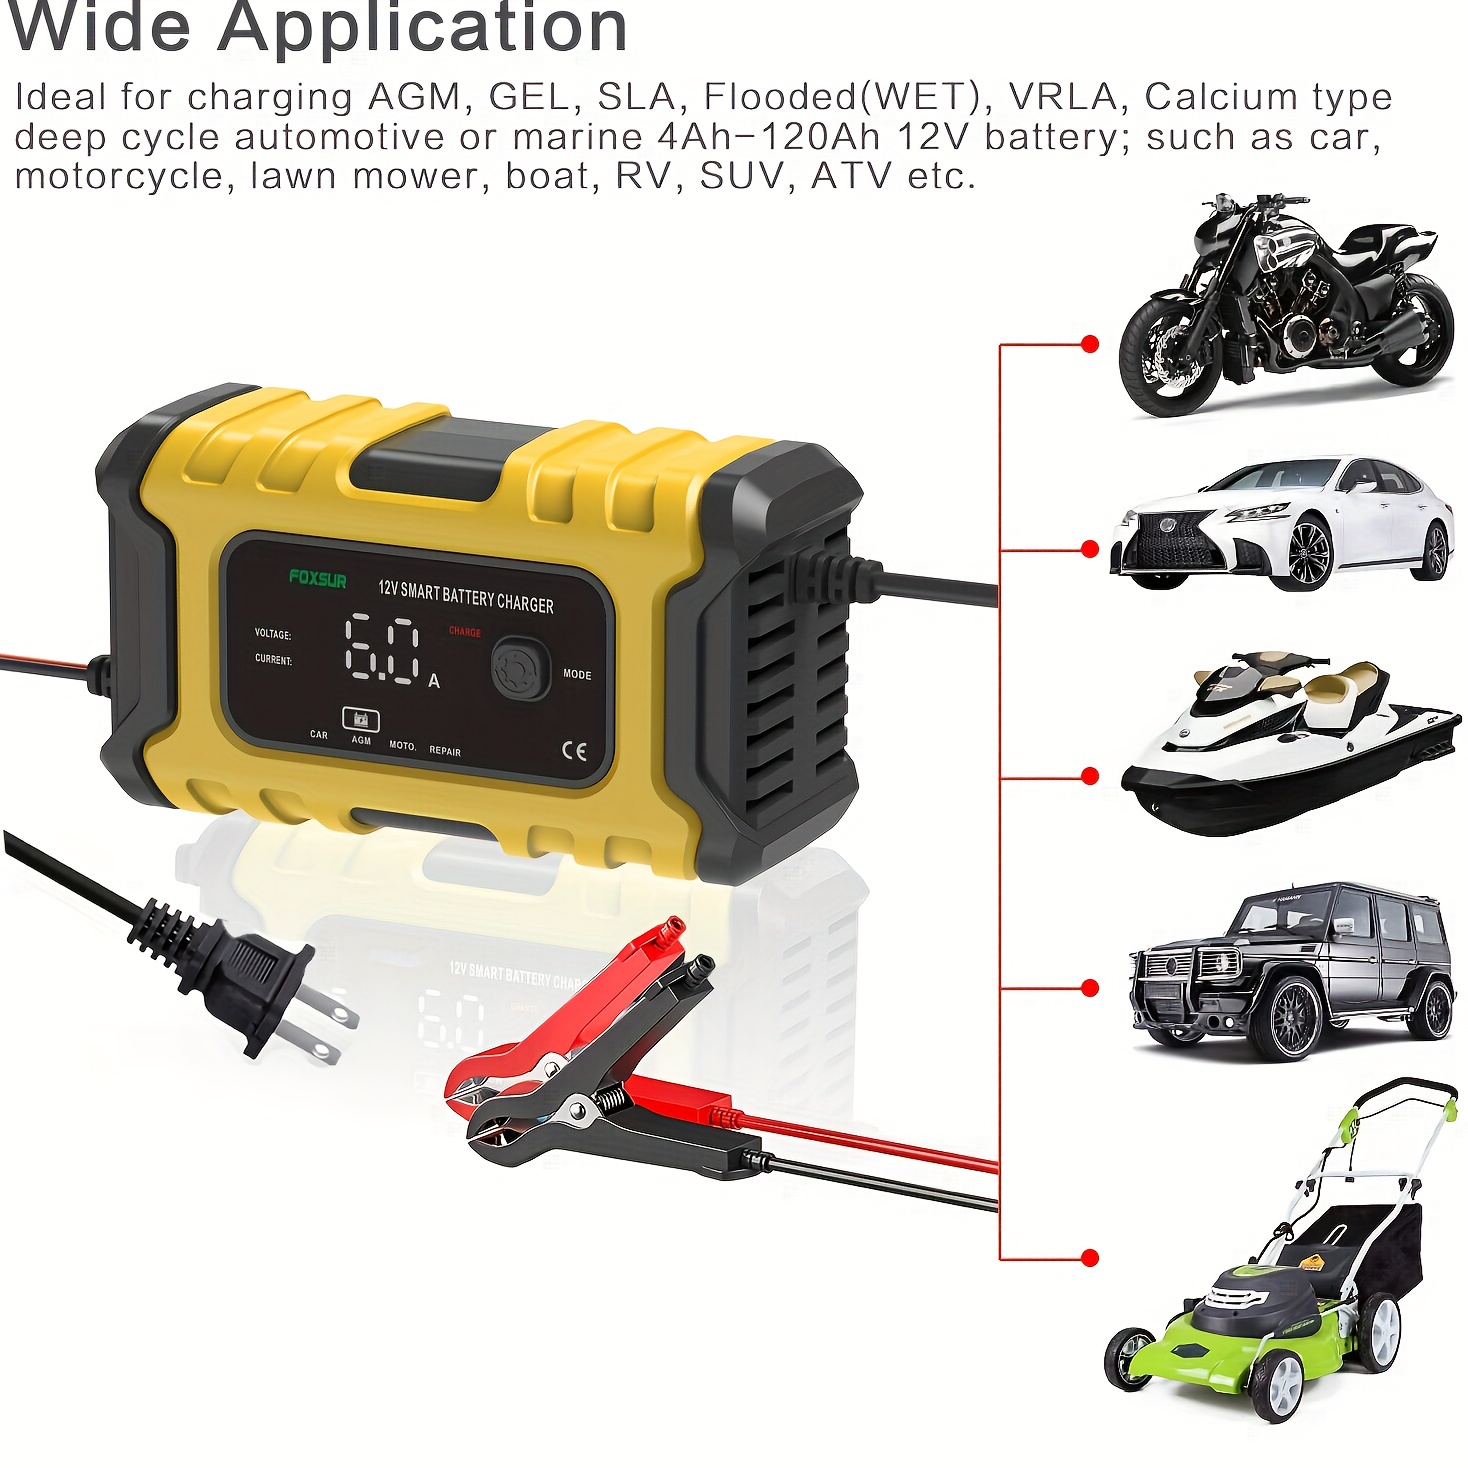 Battery chargers for cars and motorcycle batteries